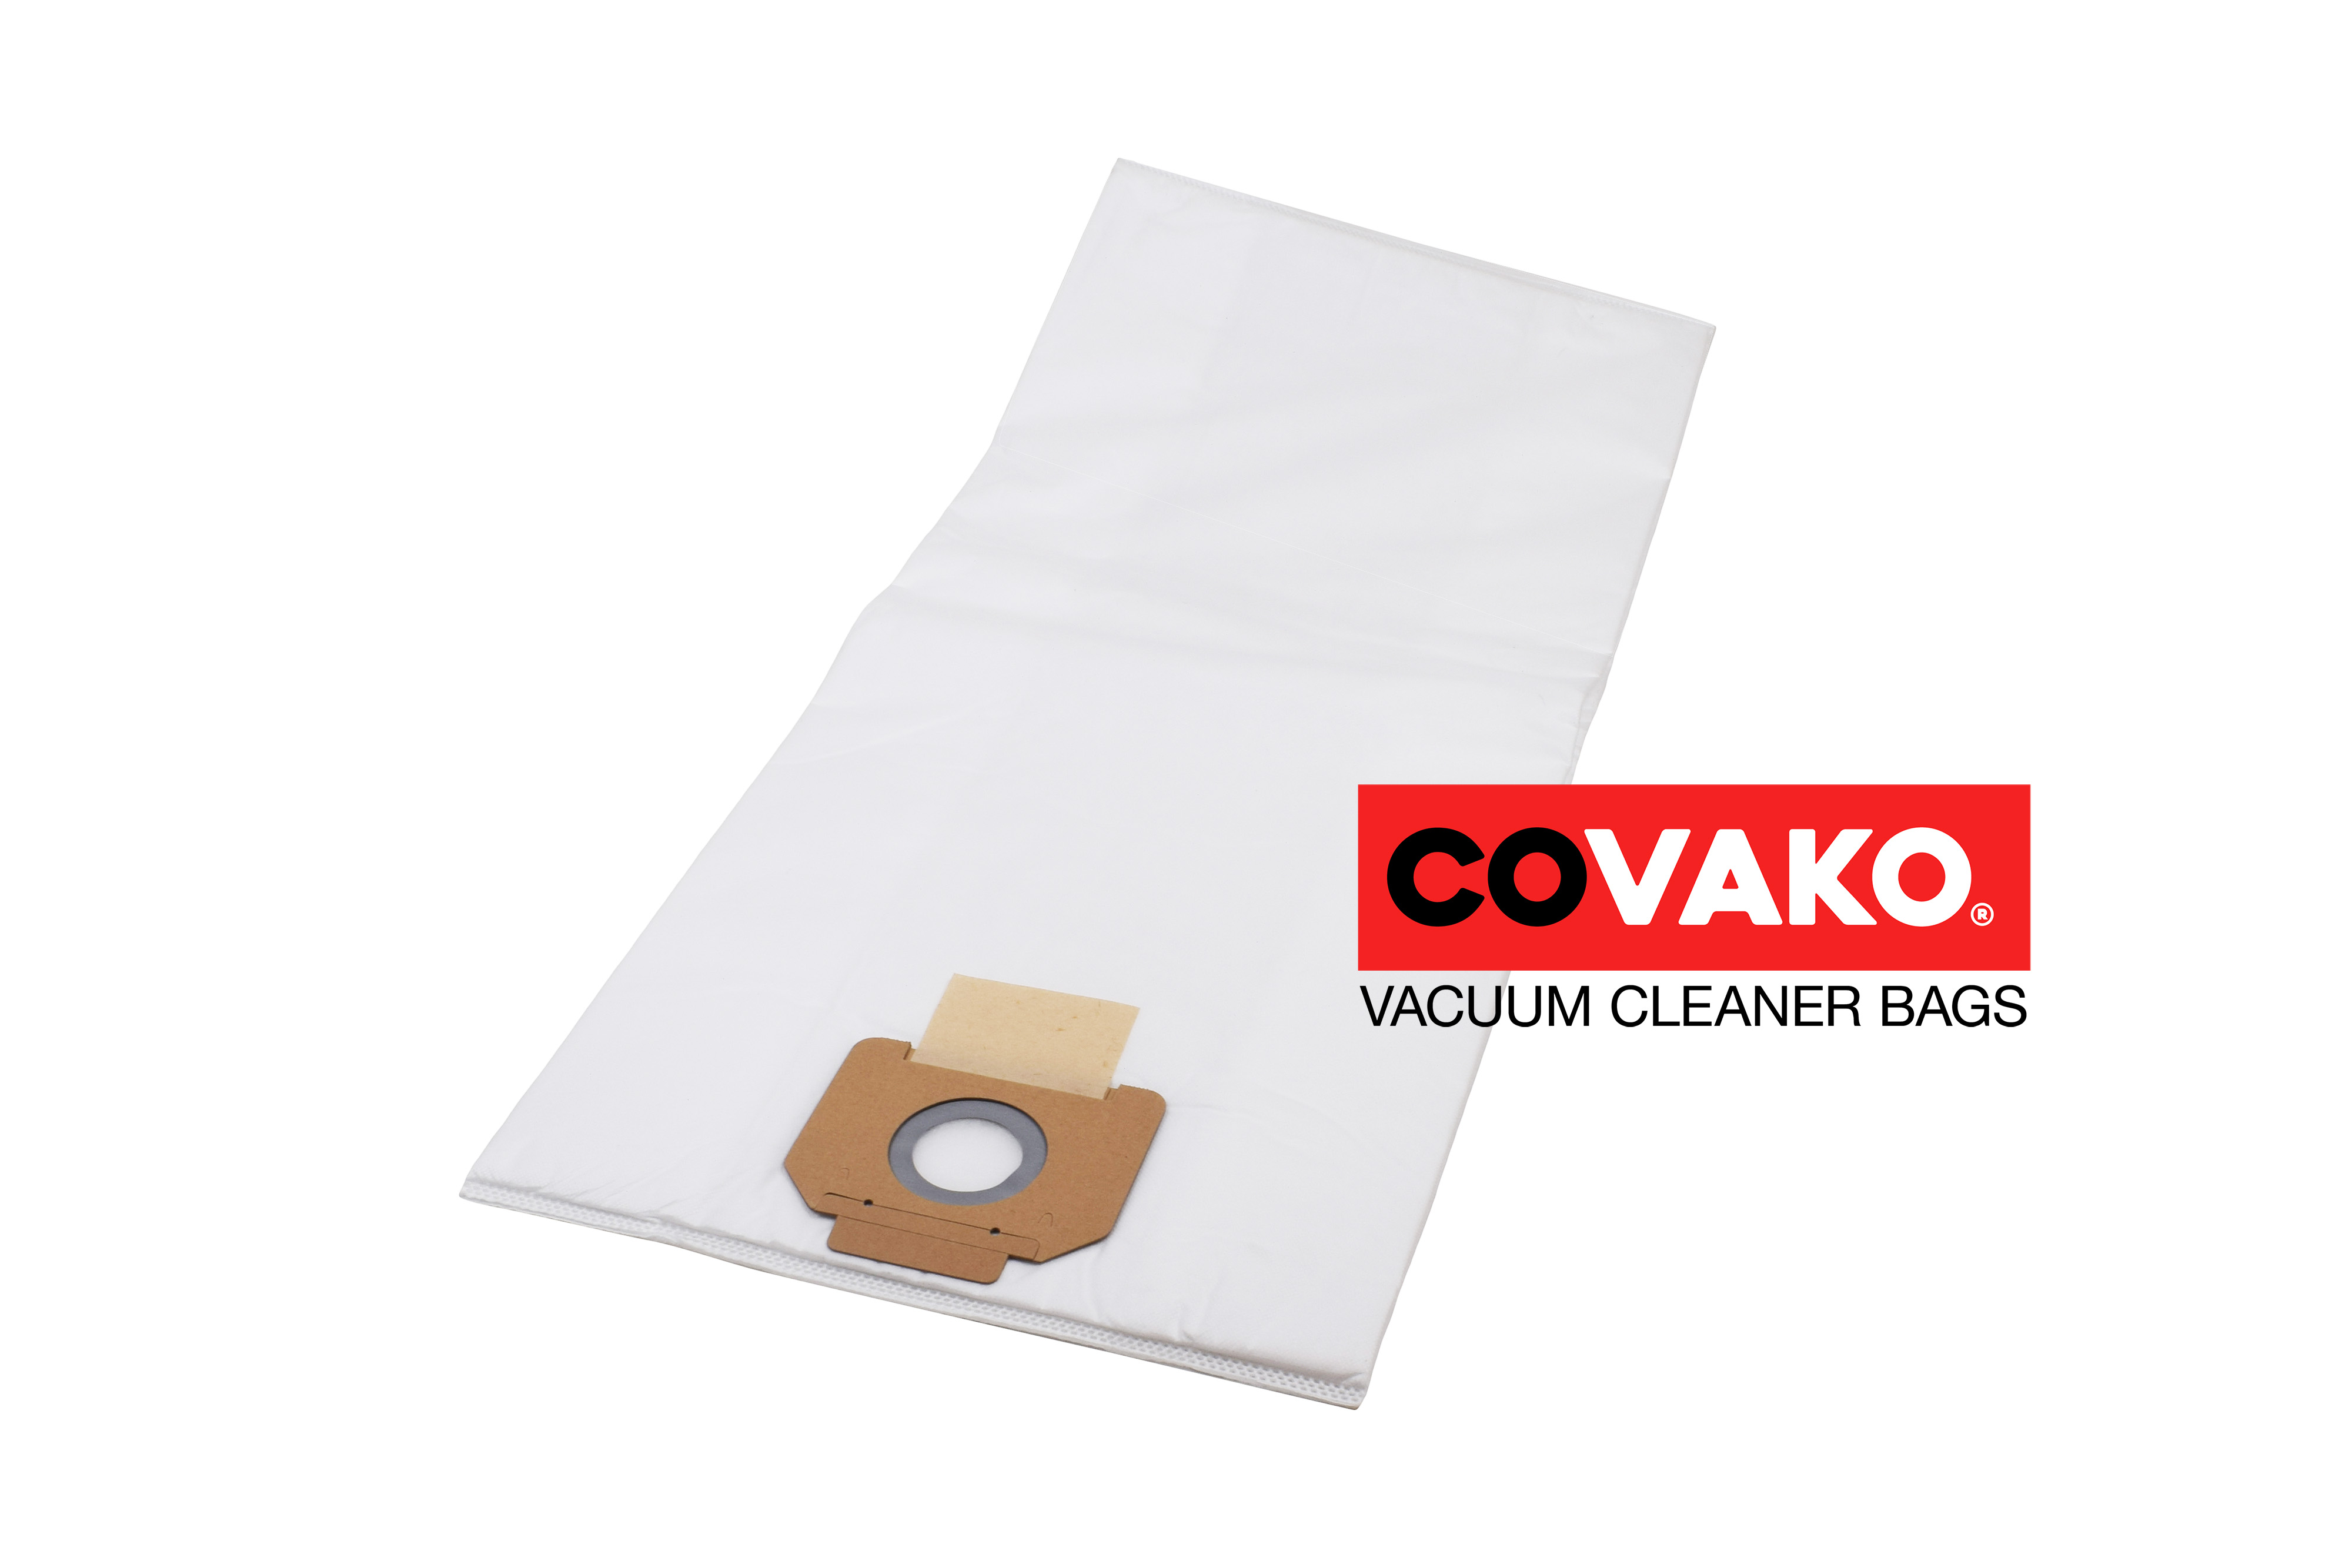 Fakir IC 428 RT / Synthesis - Fakir vacuum cleaner bags